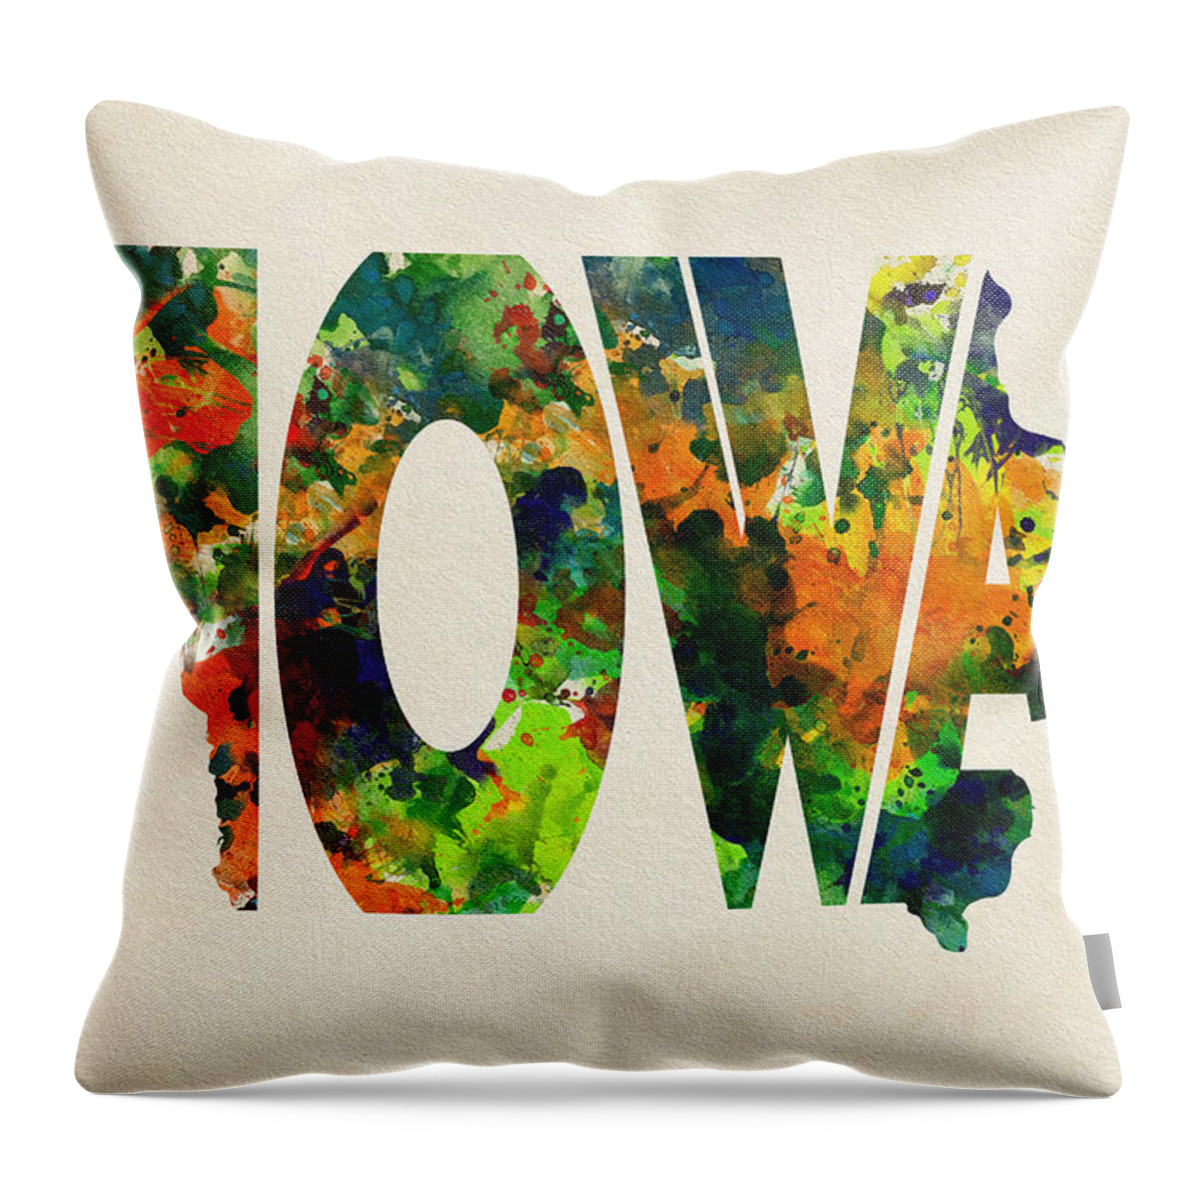 Iowa Throw Pillow featuring the painting Iowa Typographic Watercolor Map by Inspirowl Design